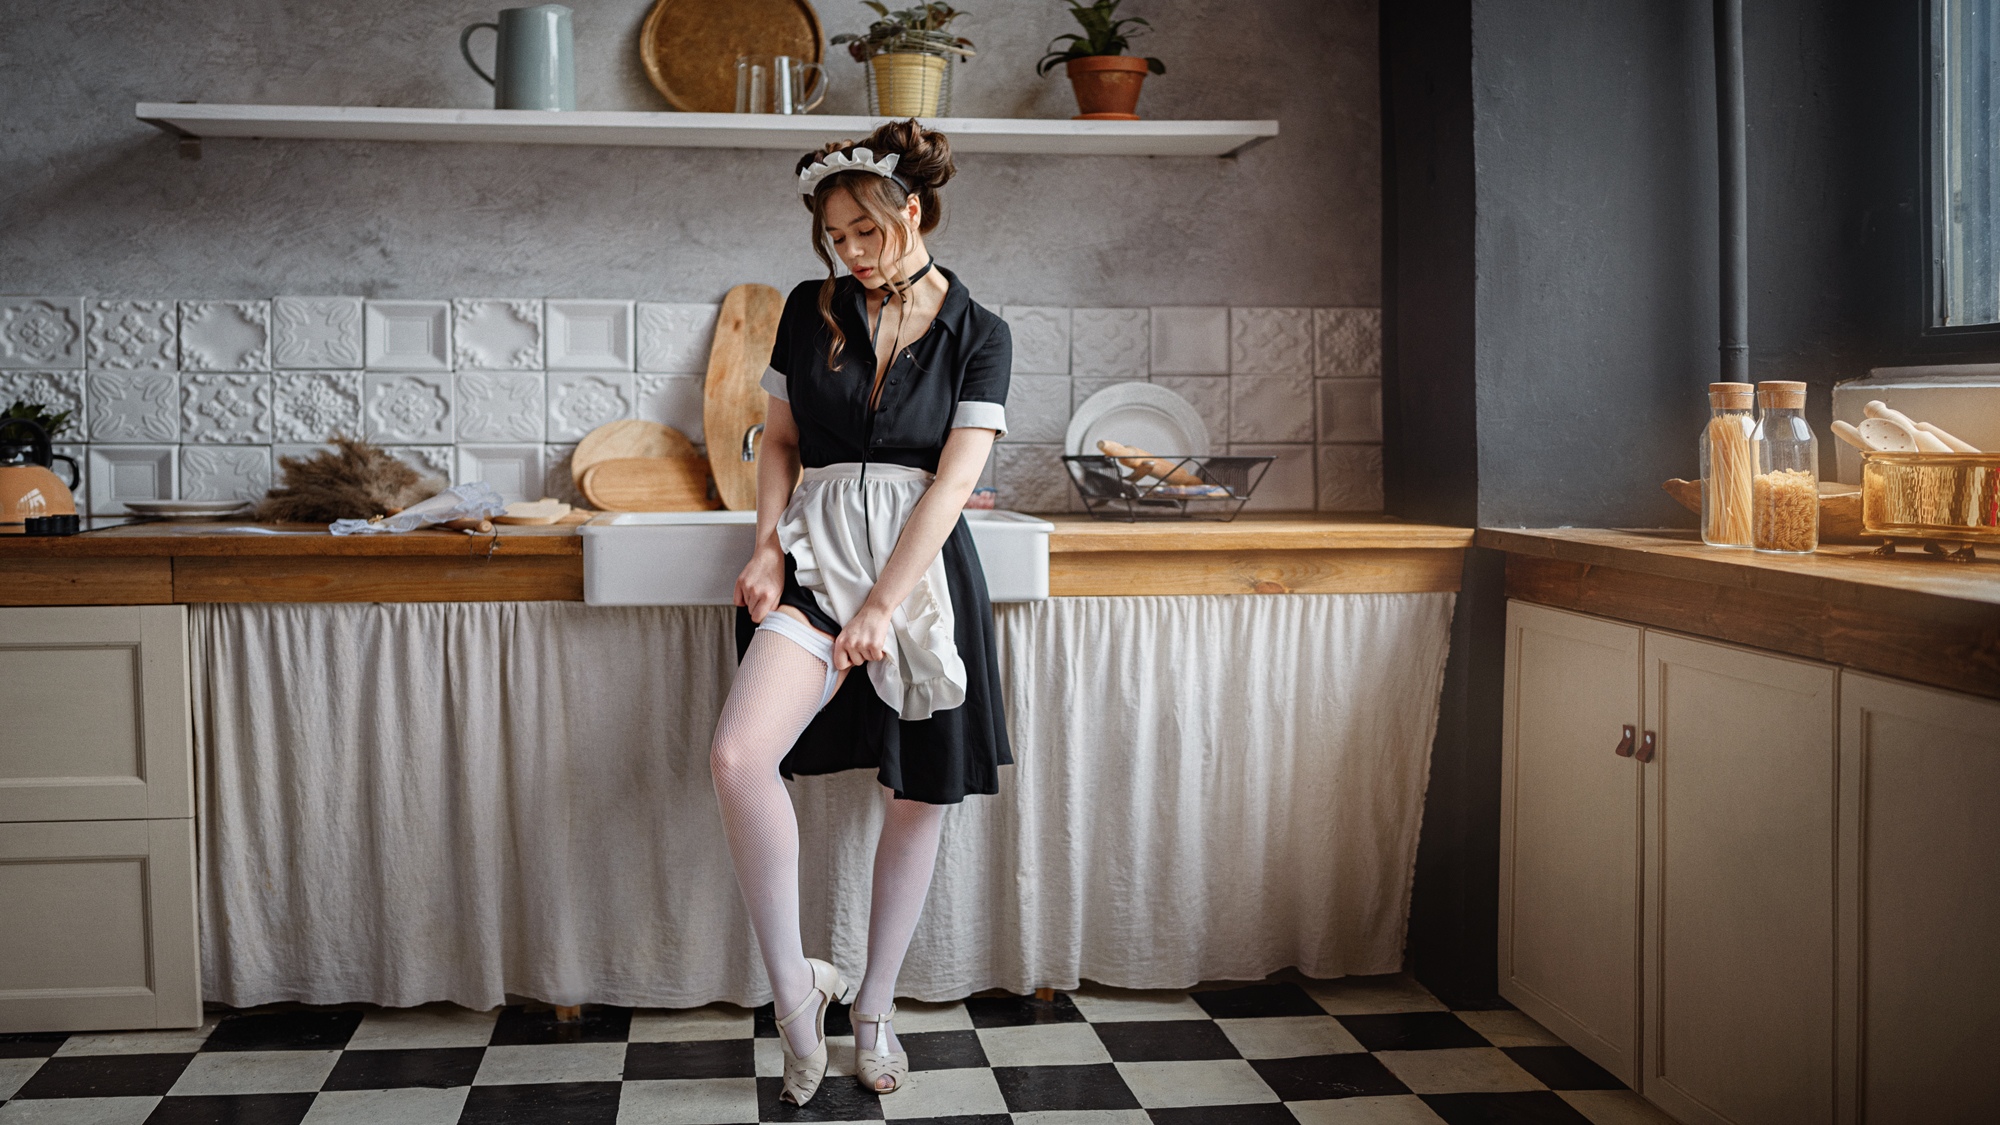 People 2000x1125 women maid maid outfit white stockings Maya Shakhnazarova indoors women indoors standing chess floor checkered kitchen ankle strap heels apron sink model legs plates parted lips stockings short sleeves Georgy Chernyadyev floor